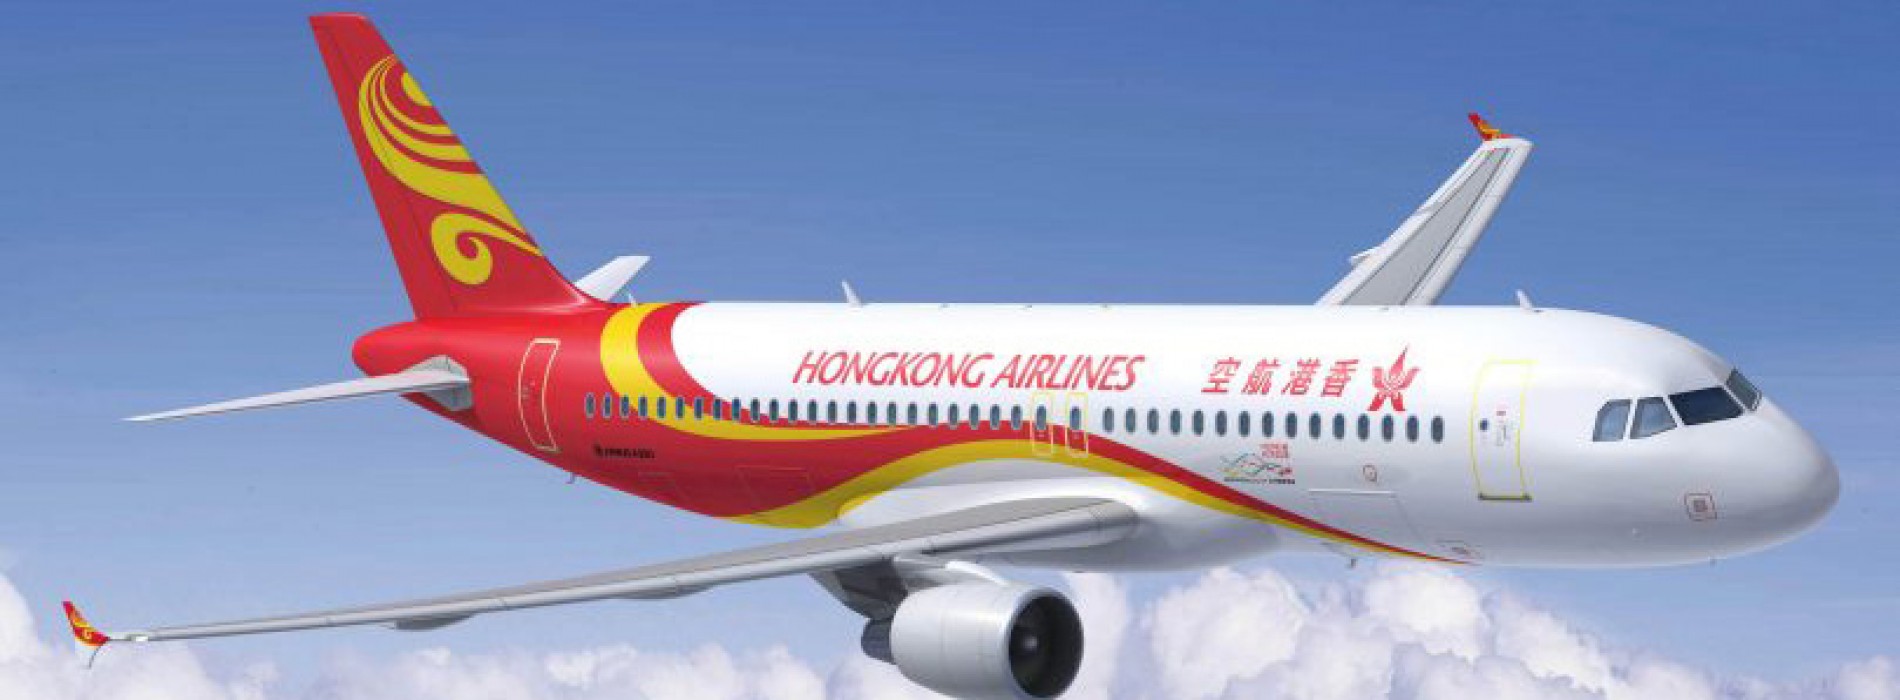 Hong Kong Airlines brings unique packages to agents worldwide with Sabre branded fares